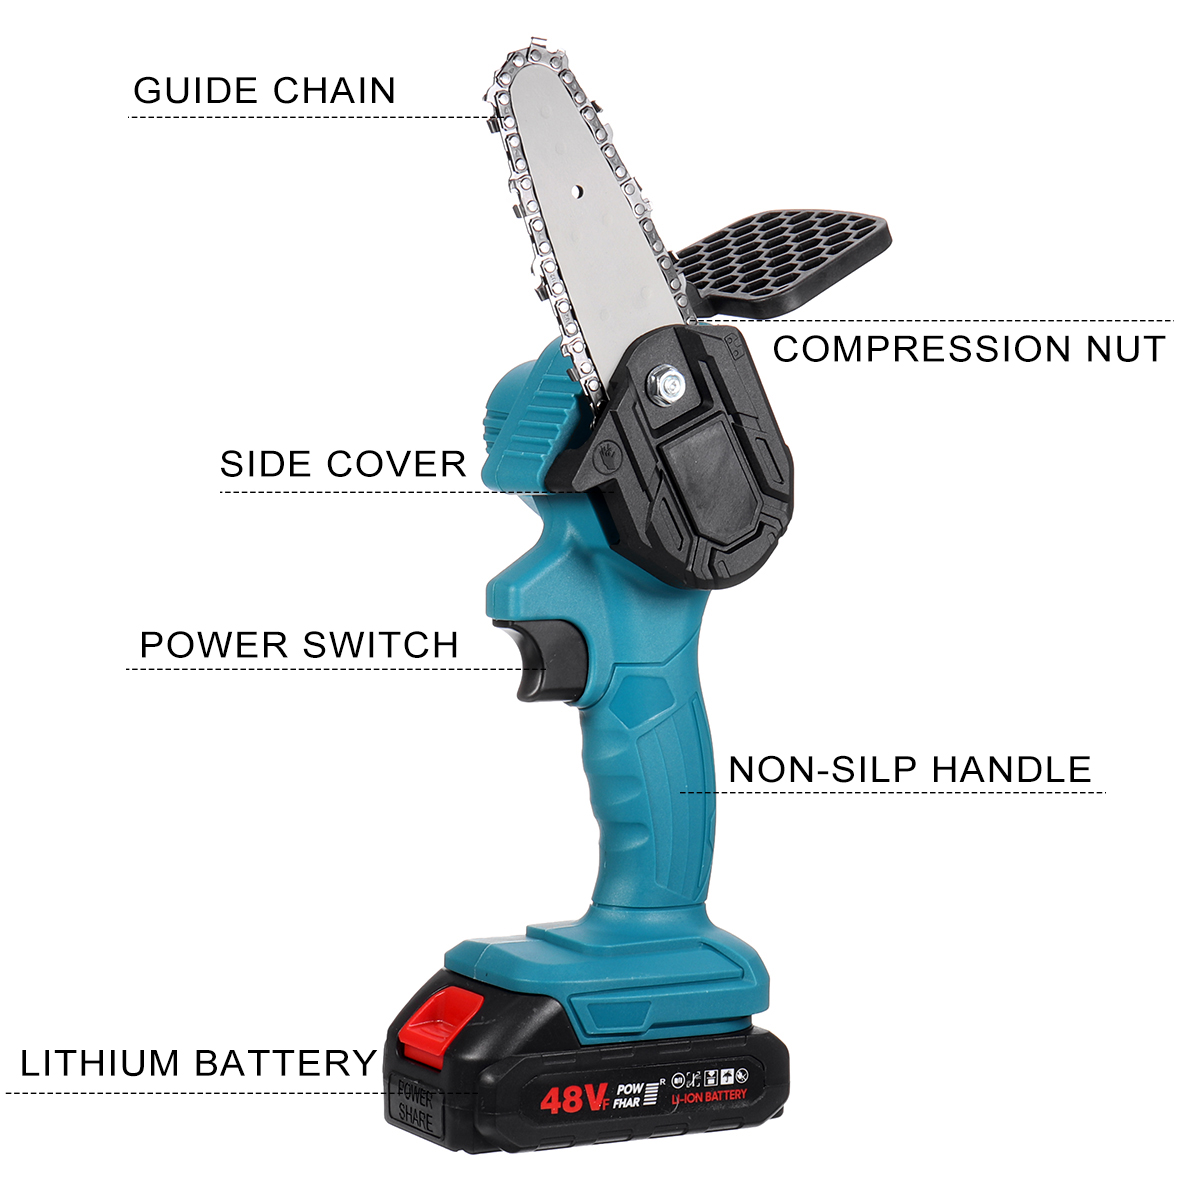 4inch-800W-48VF-Electric-Chain-Saw-Portable-Handheld-Wood-Cutter-Woodworking-Cutting-Tool-W-None1pc2-1827618-4